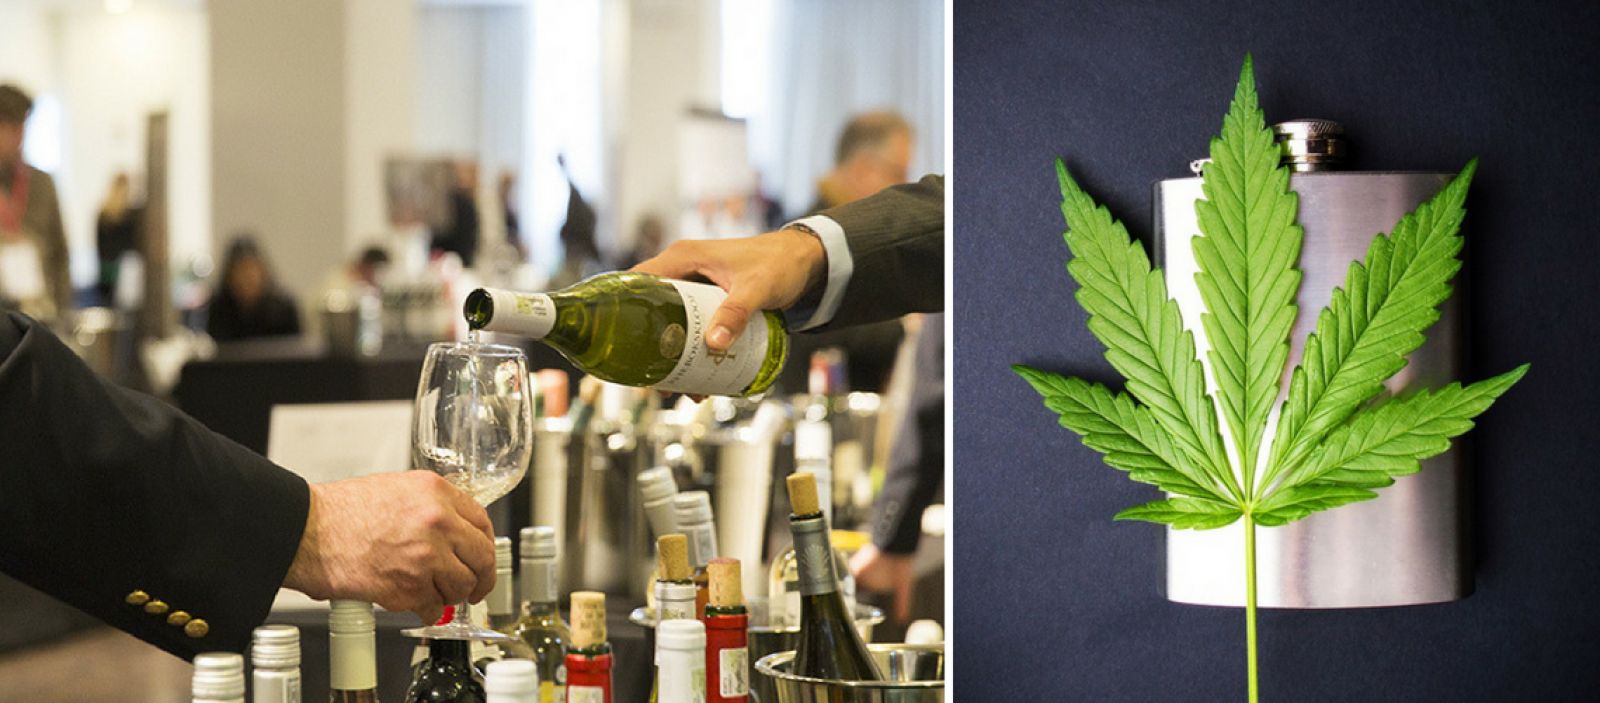 Photo for: Why to Attend the Cannabis Drinks Expo?